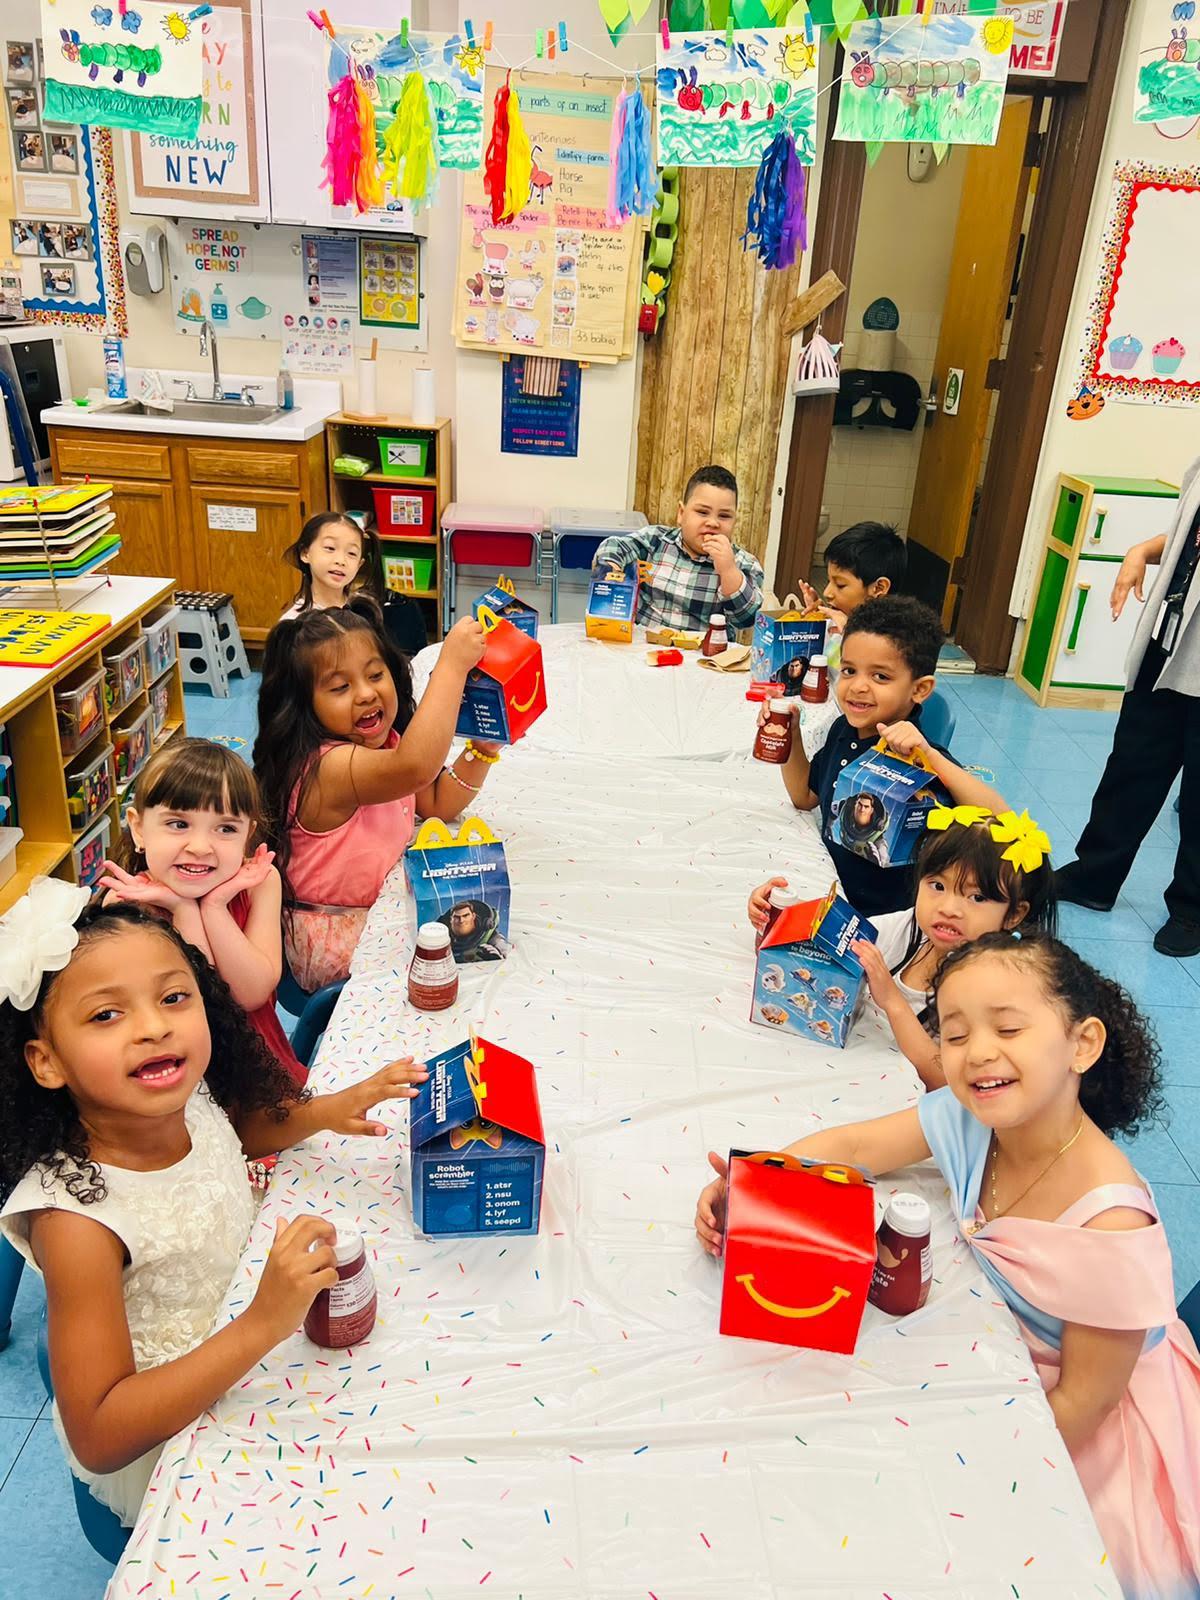 Ms. Diaz and Mr. Vaca-Room 109-The Pre-School End of Year Celebration-Photo #2